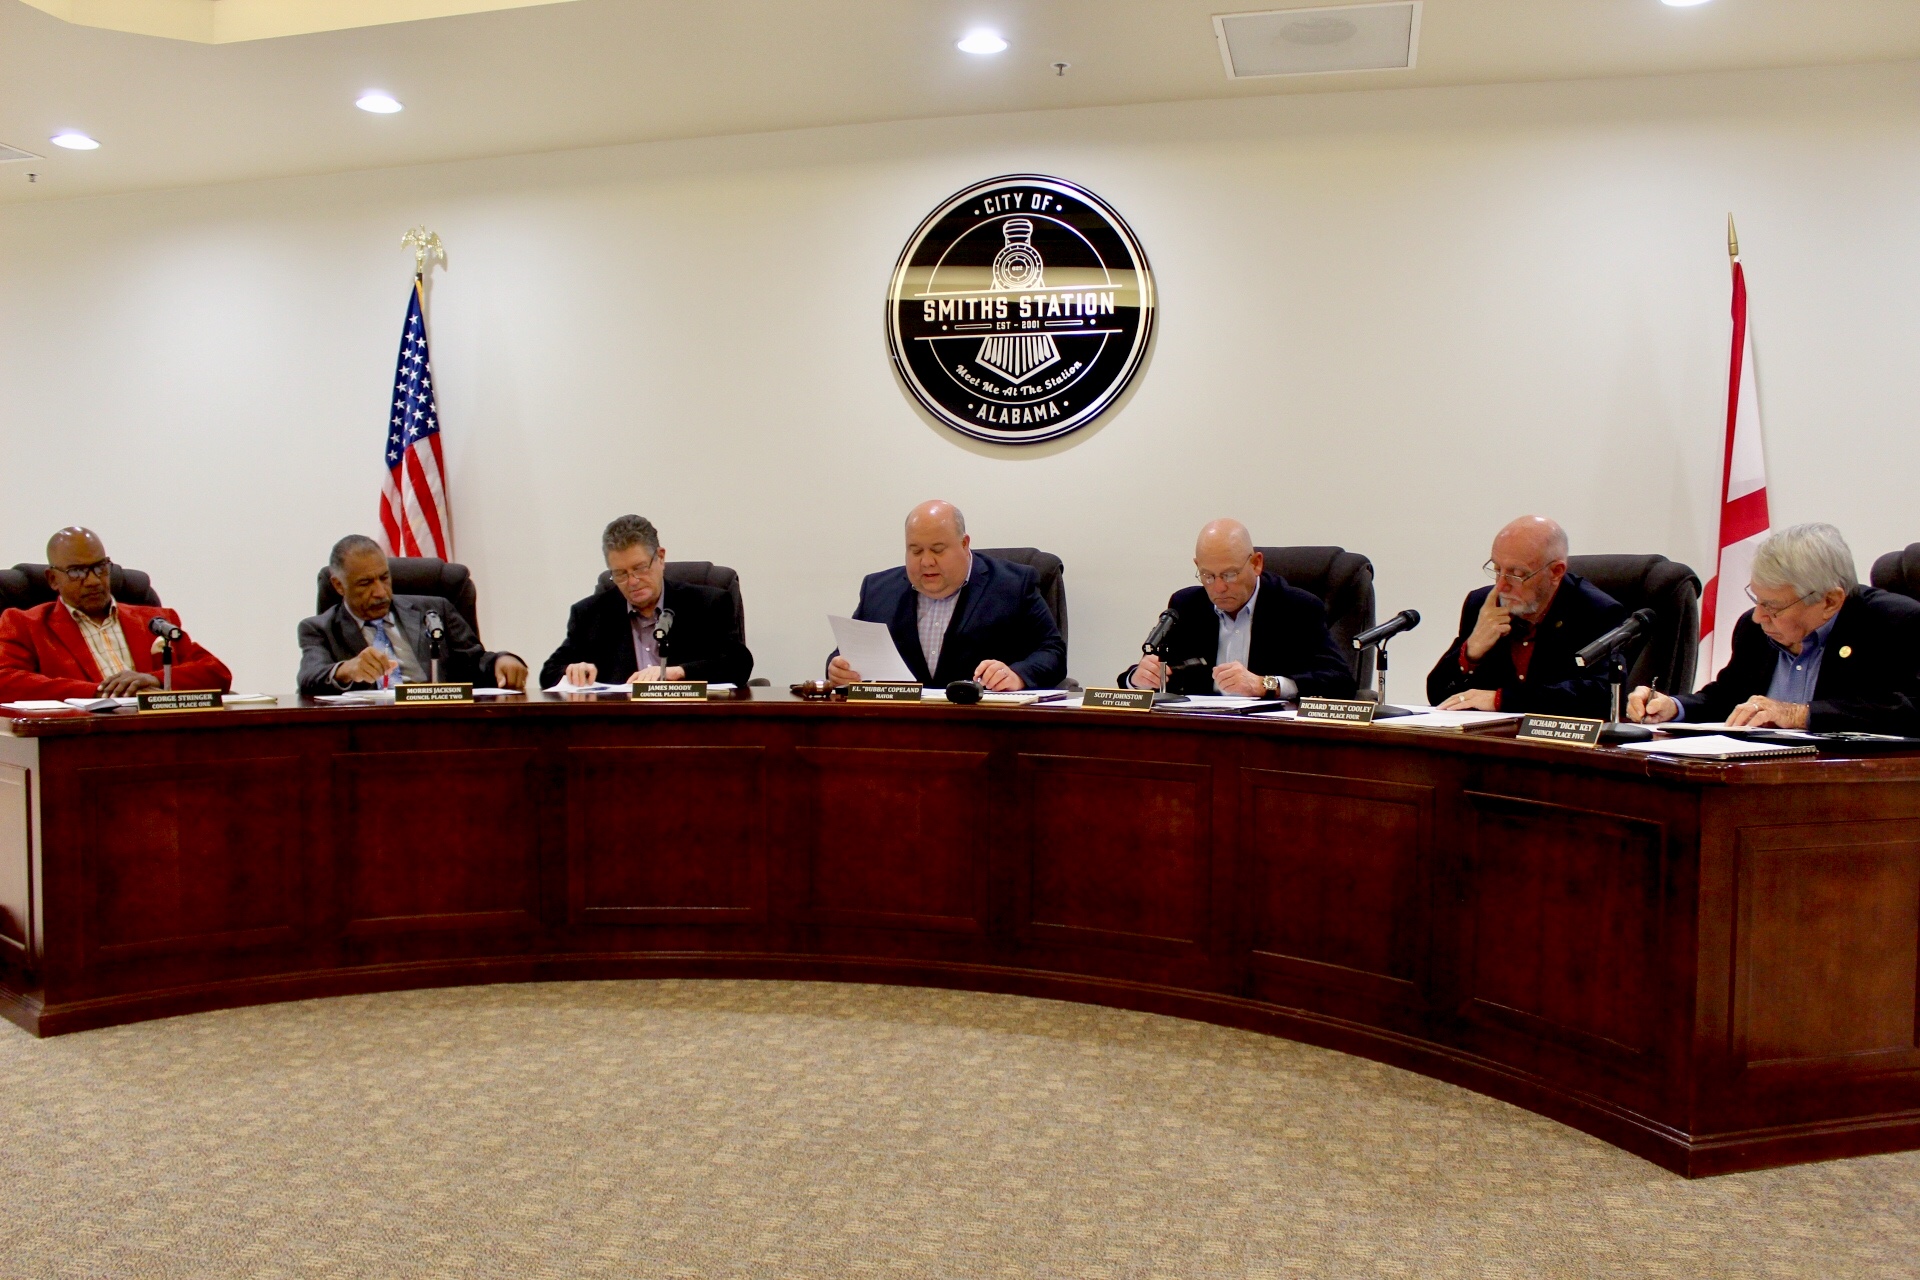 City of Smiths Station receives clean opinion on 2018 audit